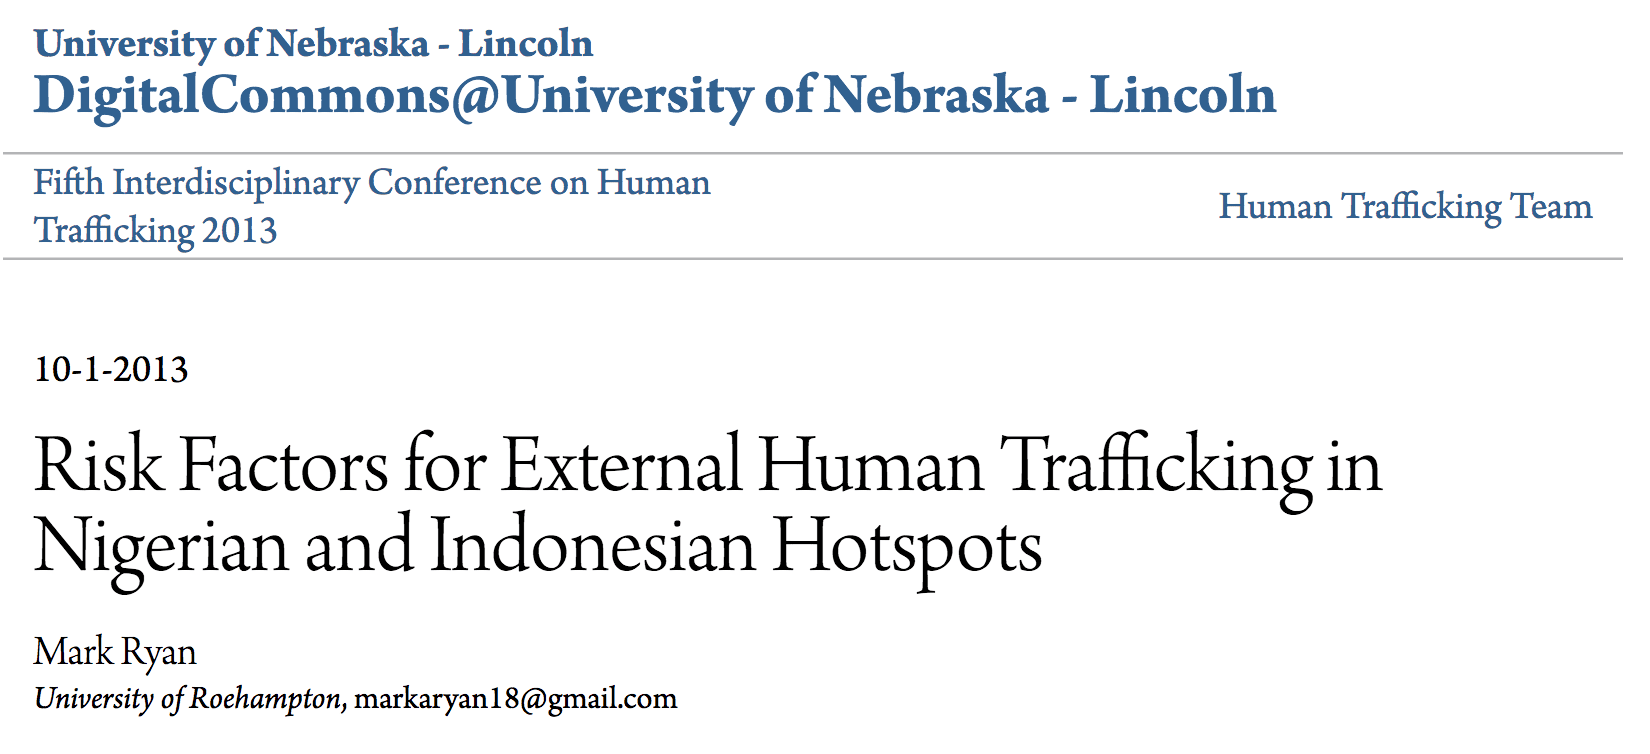 Risk Factors for External Human Trafficking in Nigerian and Indonesian Hotspots